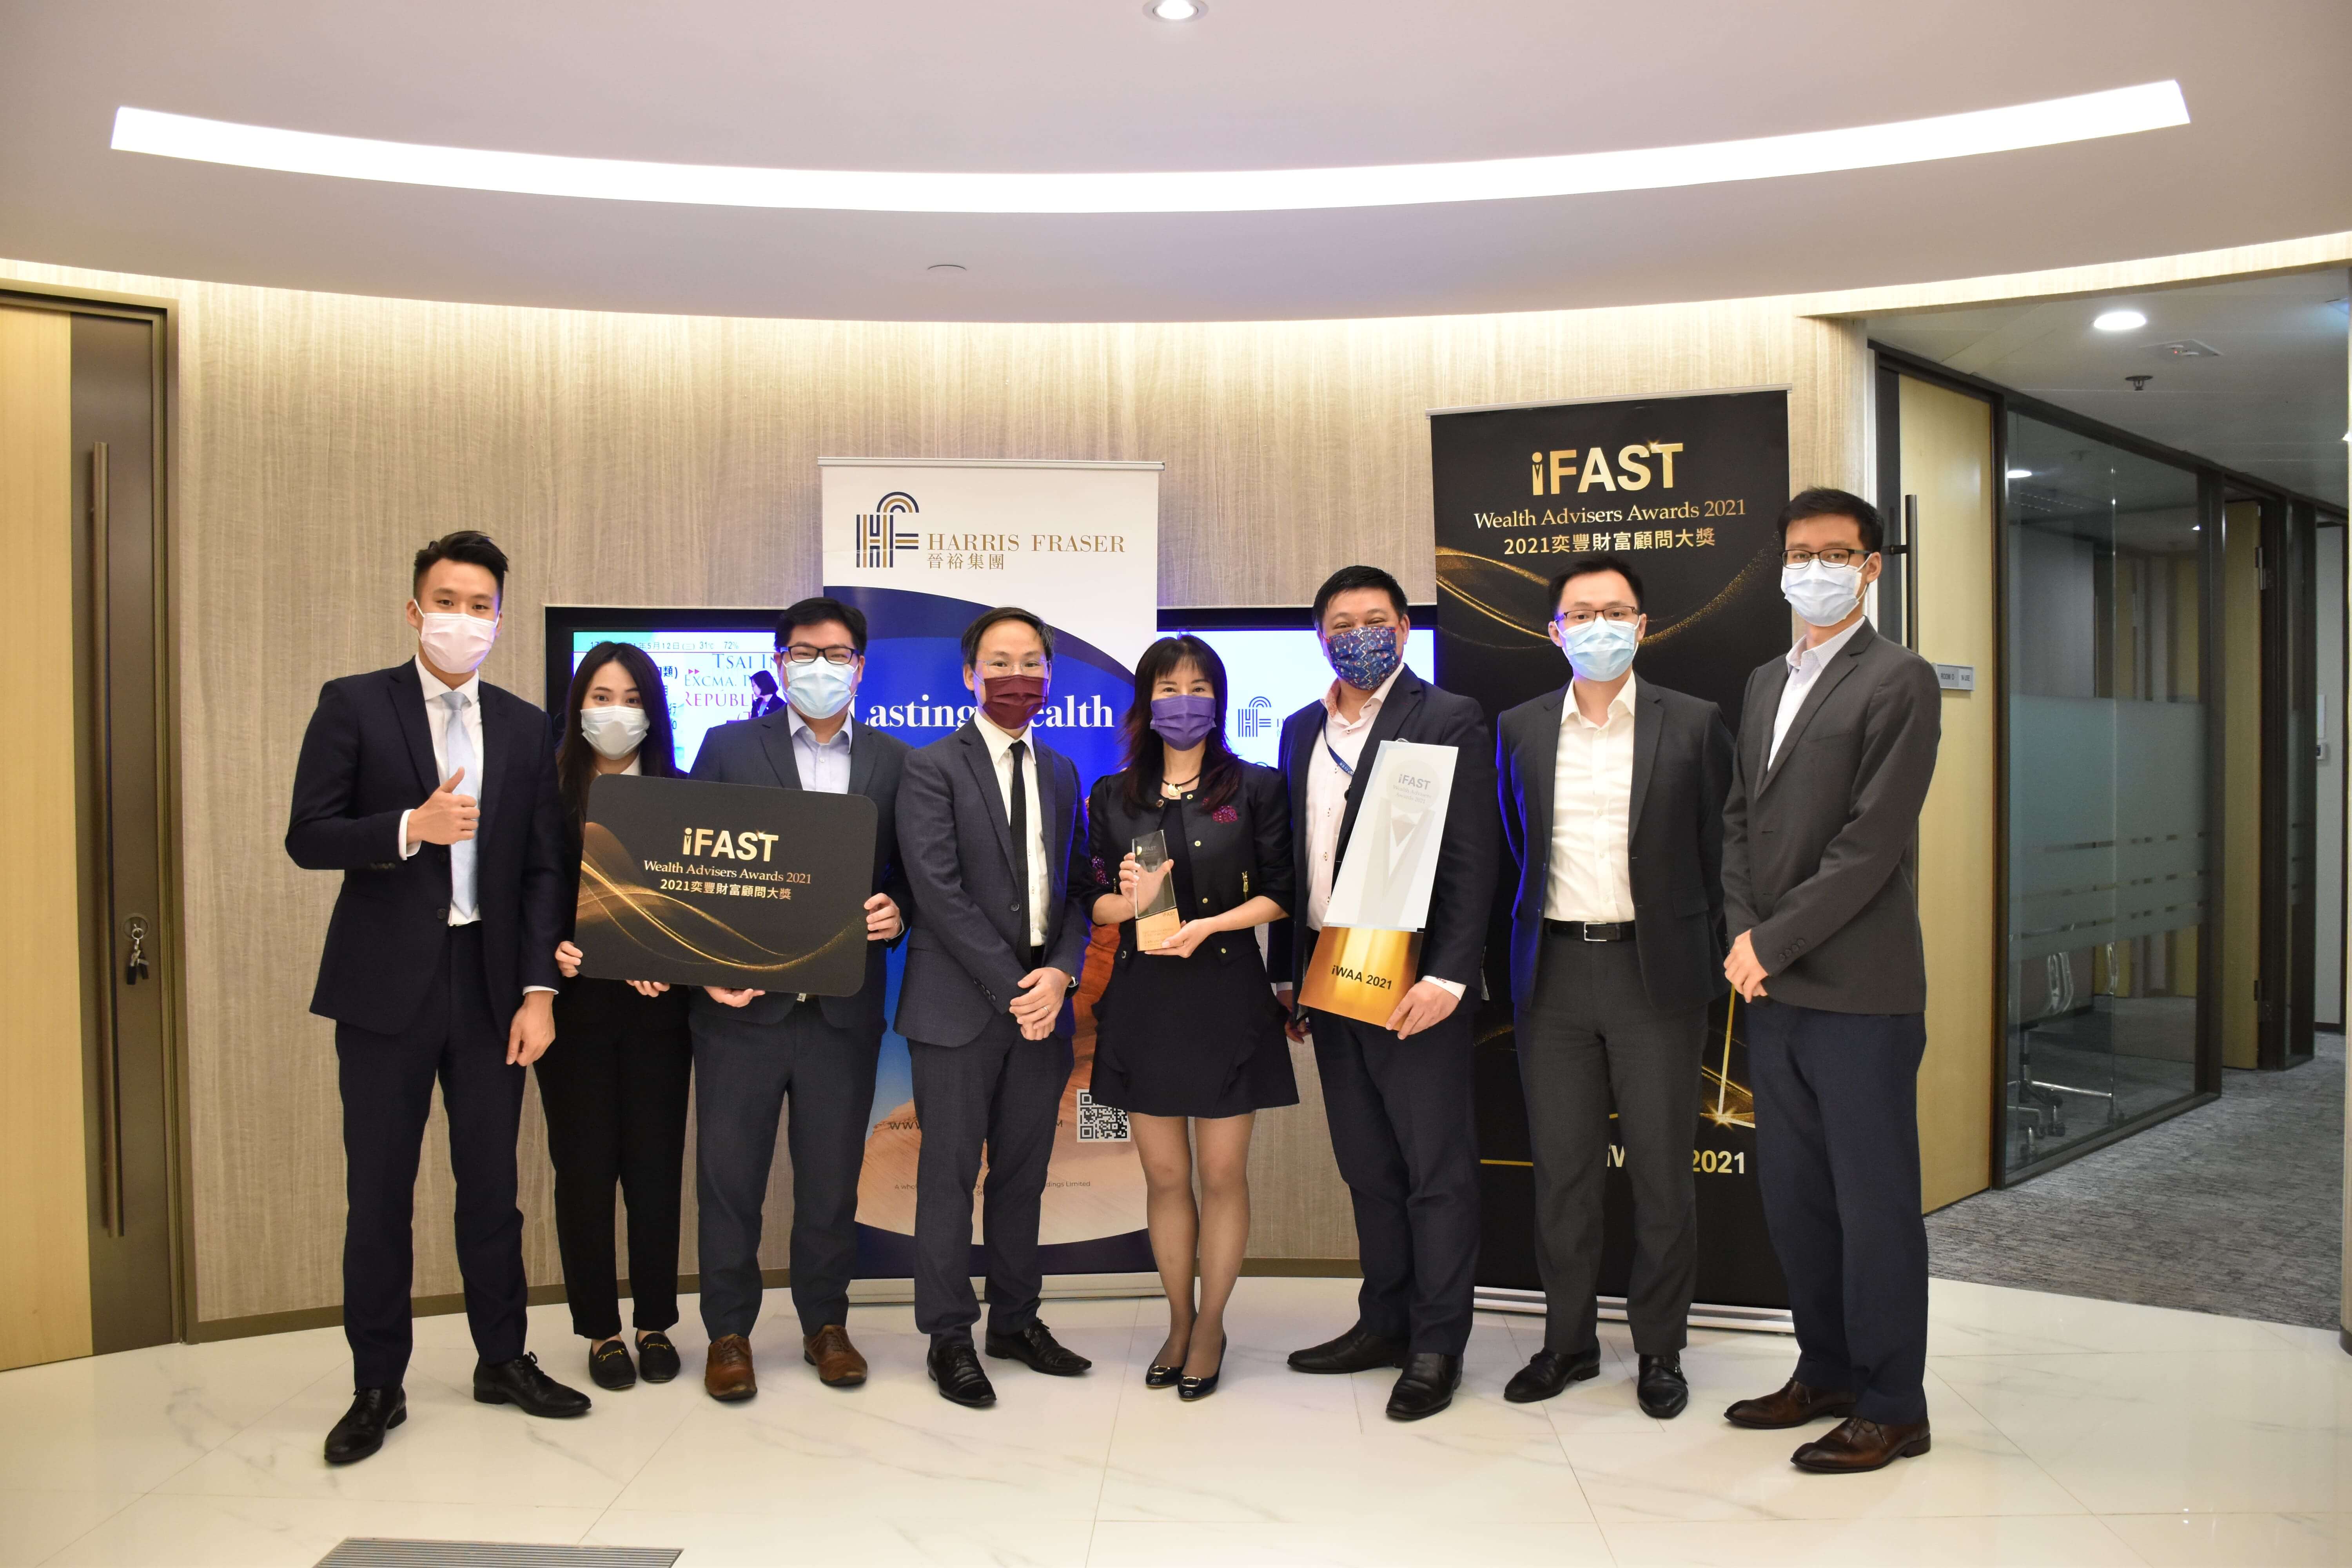 ifast wealth advisers awards 2021